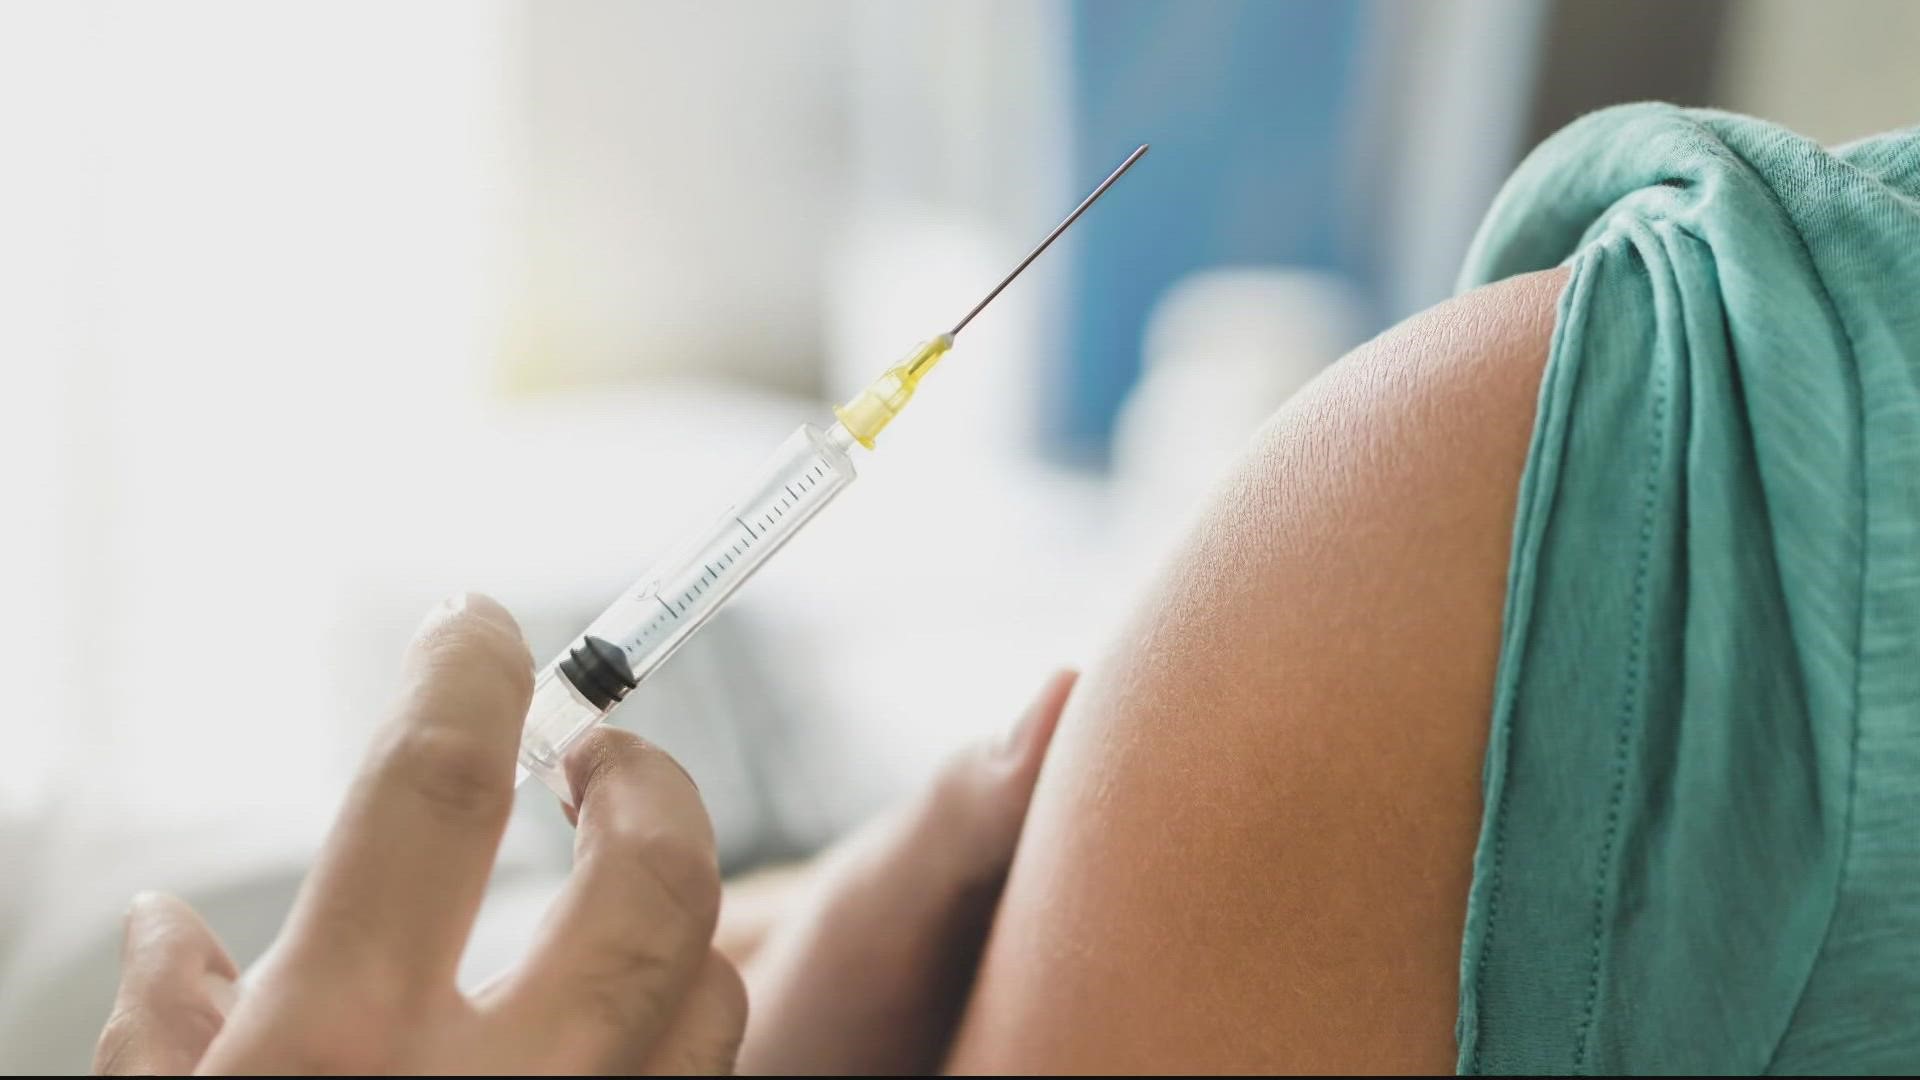 Let's VERIFY: Can a private company mandate vaccines for their staff and for their customers?